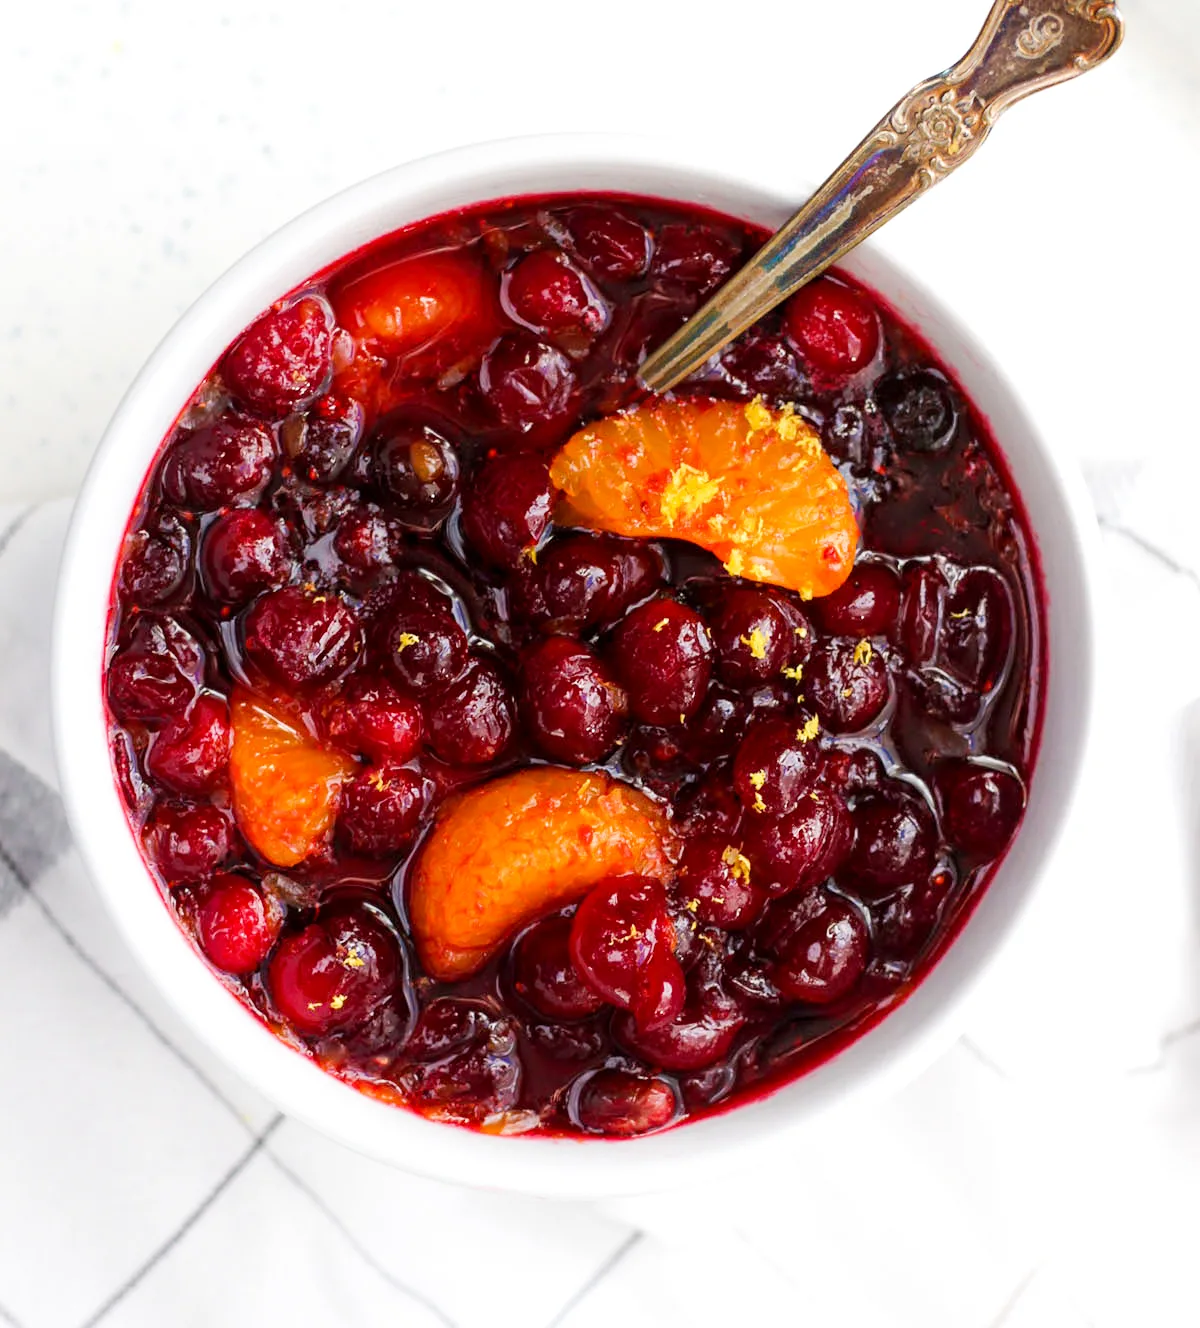 Homemade Orange Ginger Cranberry sauce in a white bowl with grated lemon rind.